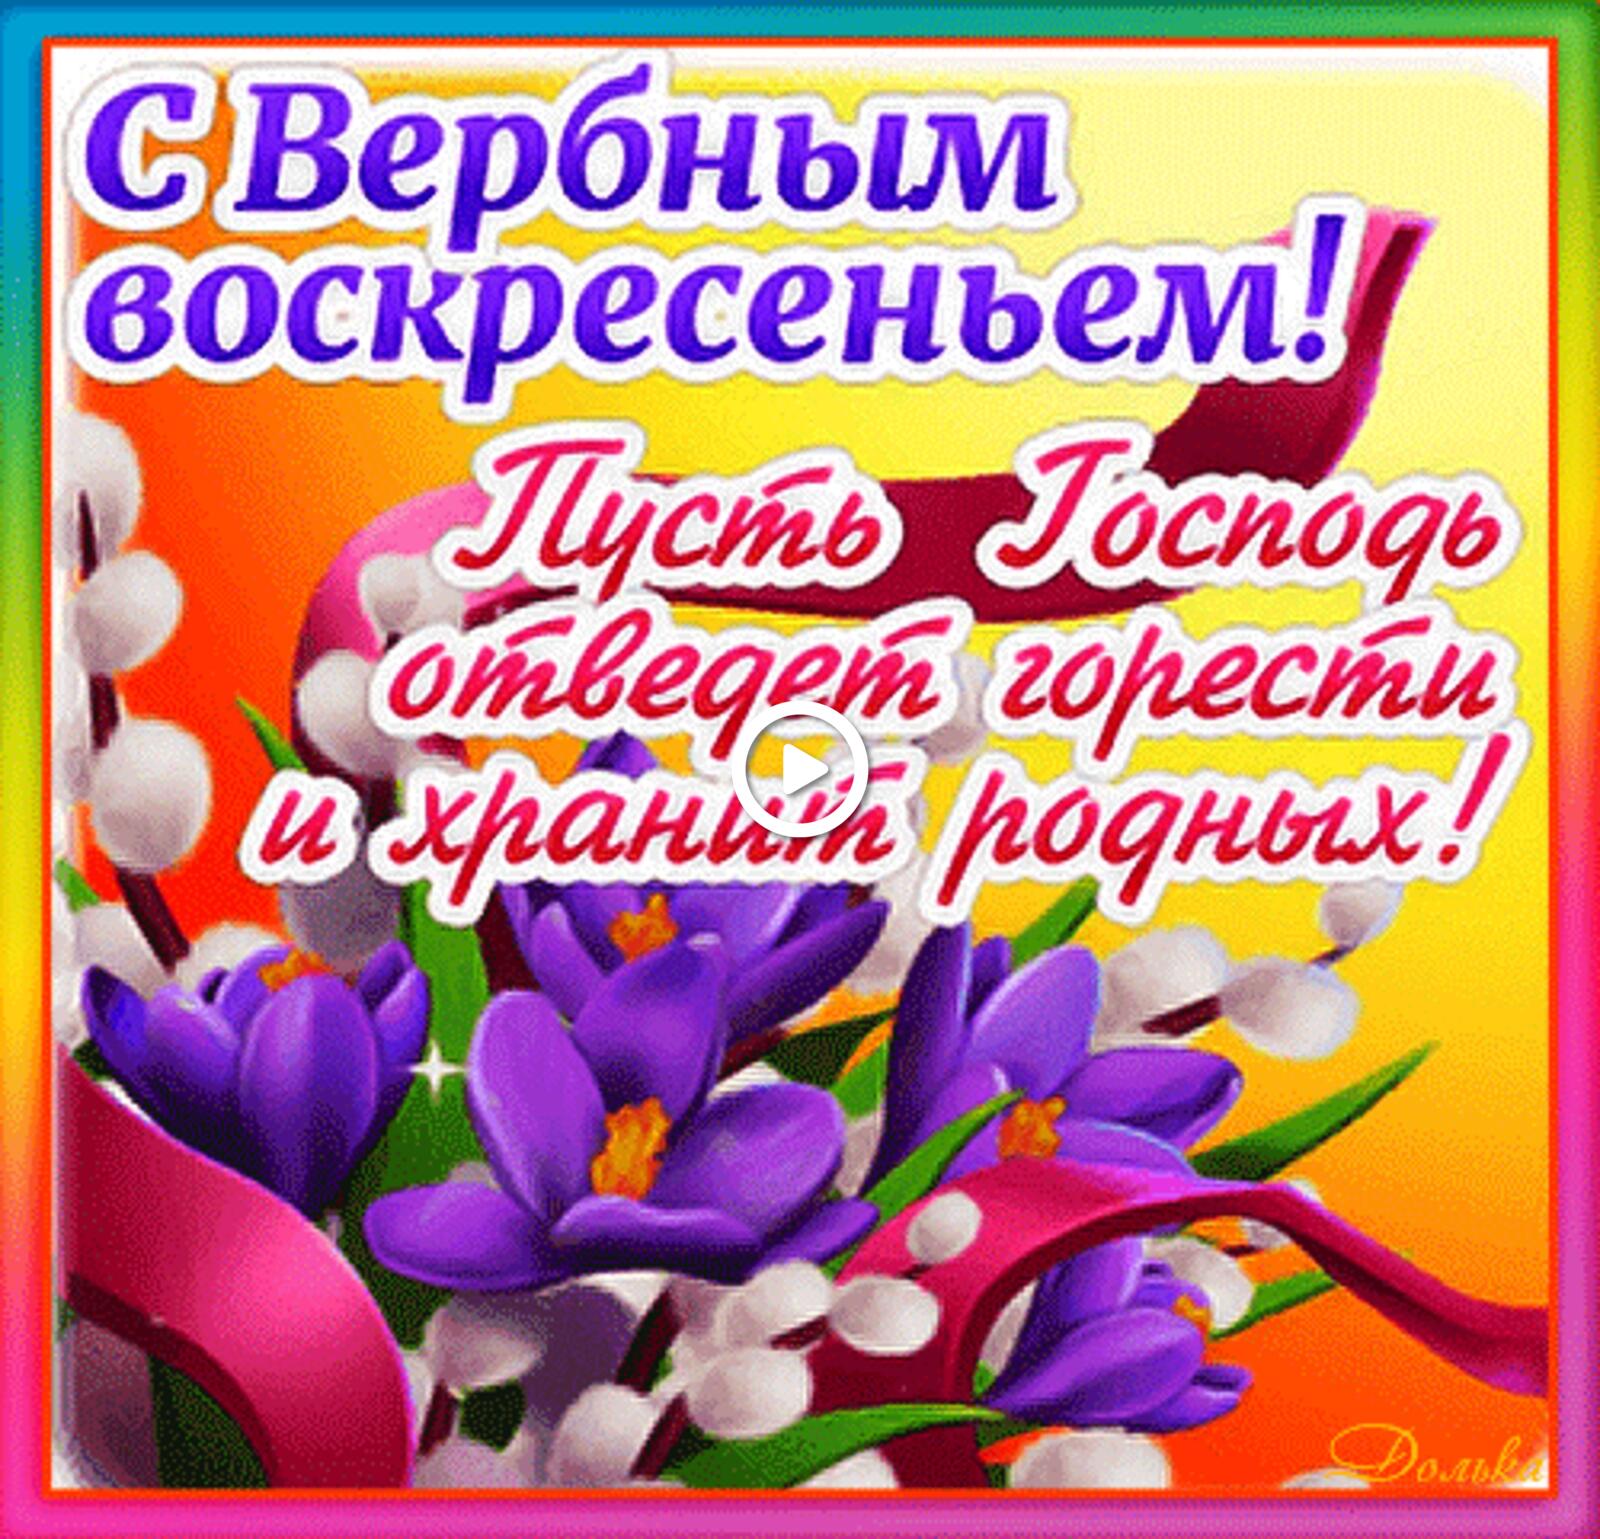 A postcard on the subject of happy palm sunday holidays flowers for free